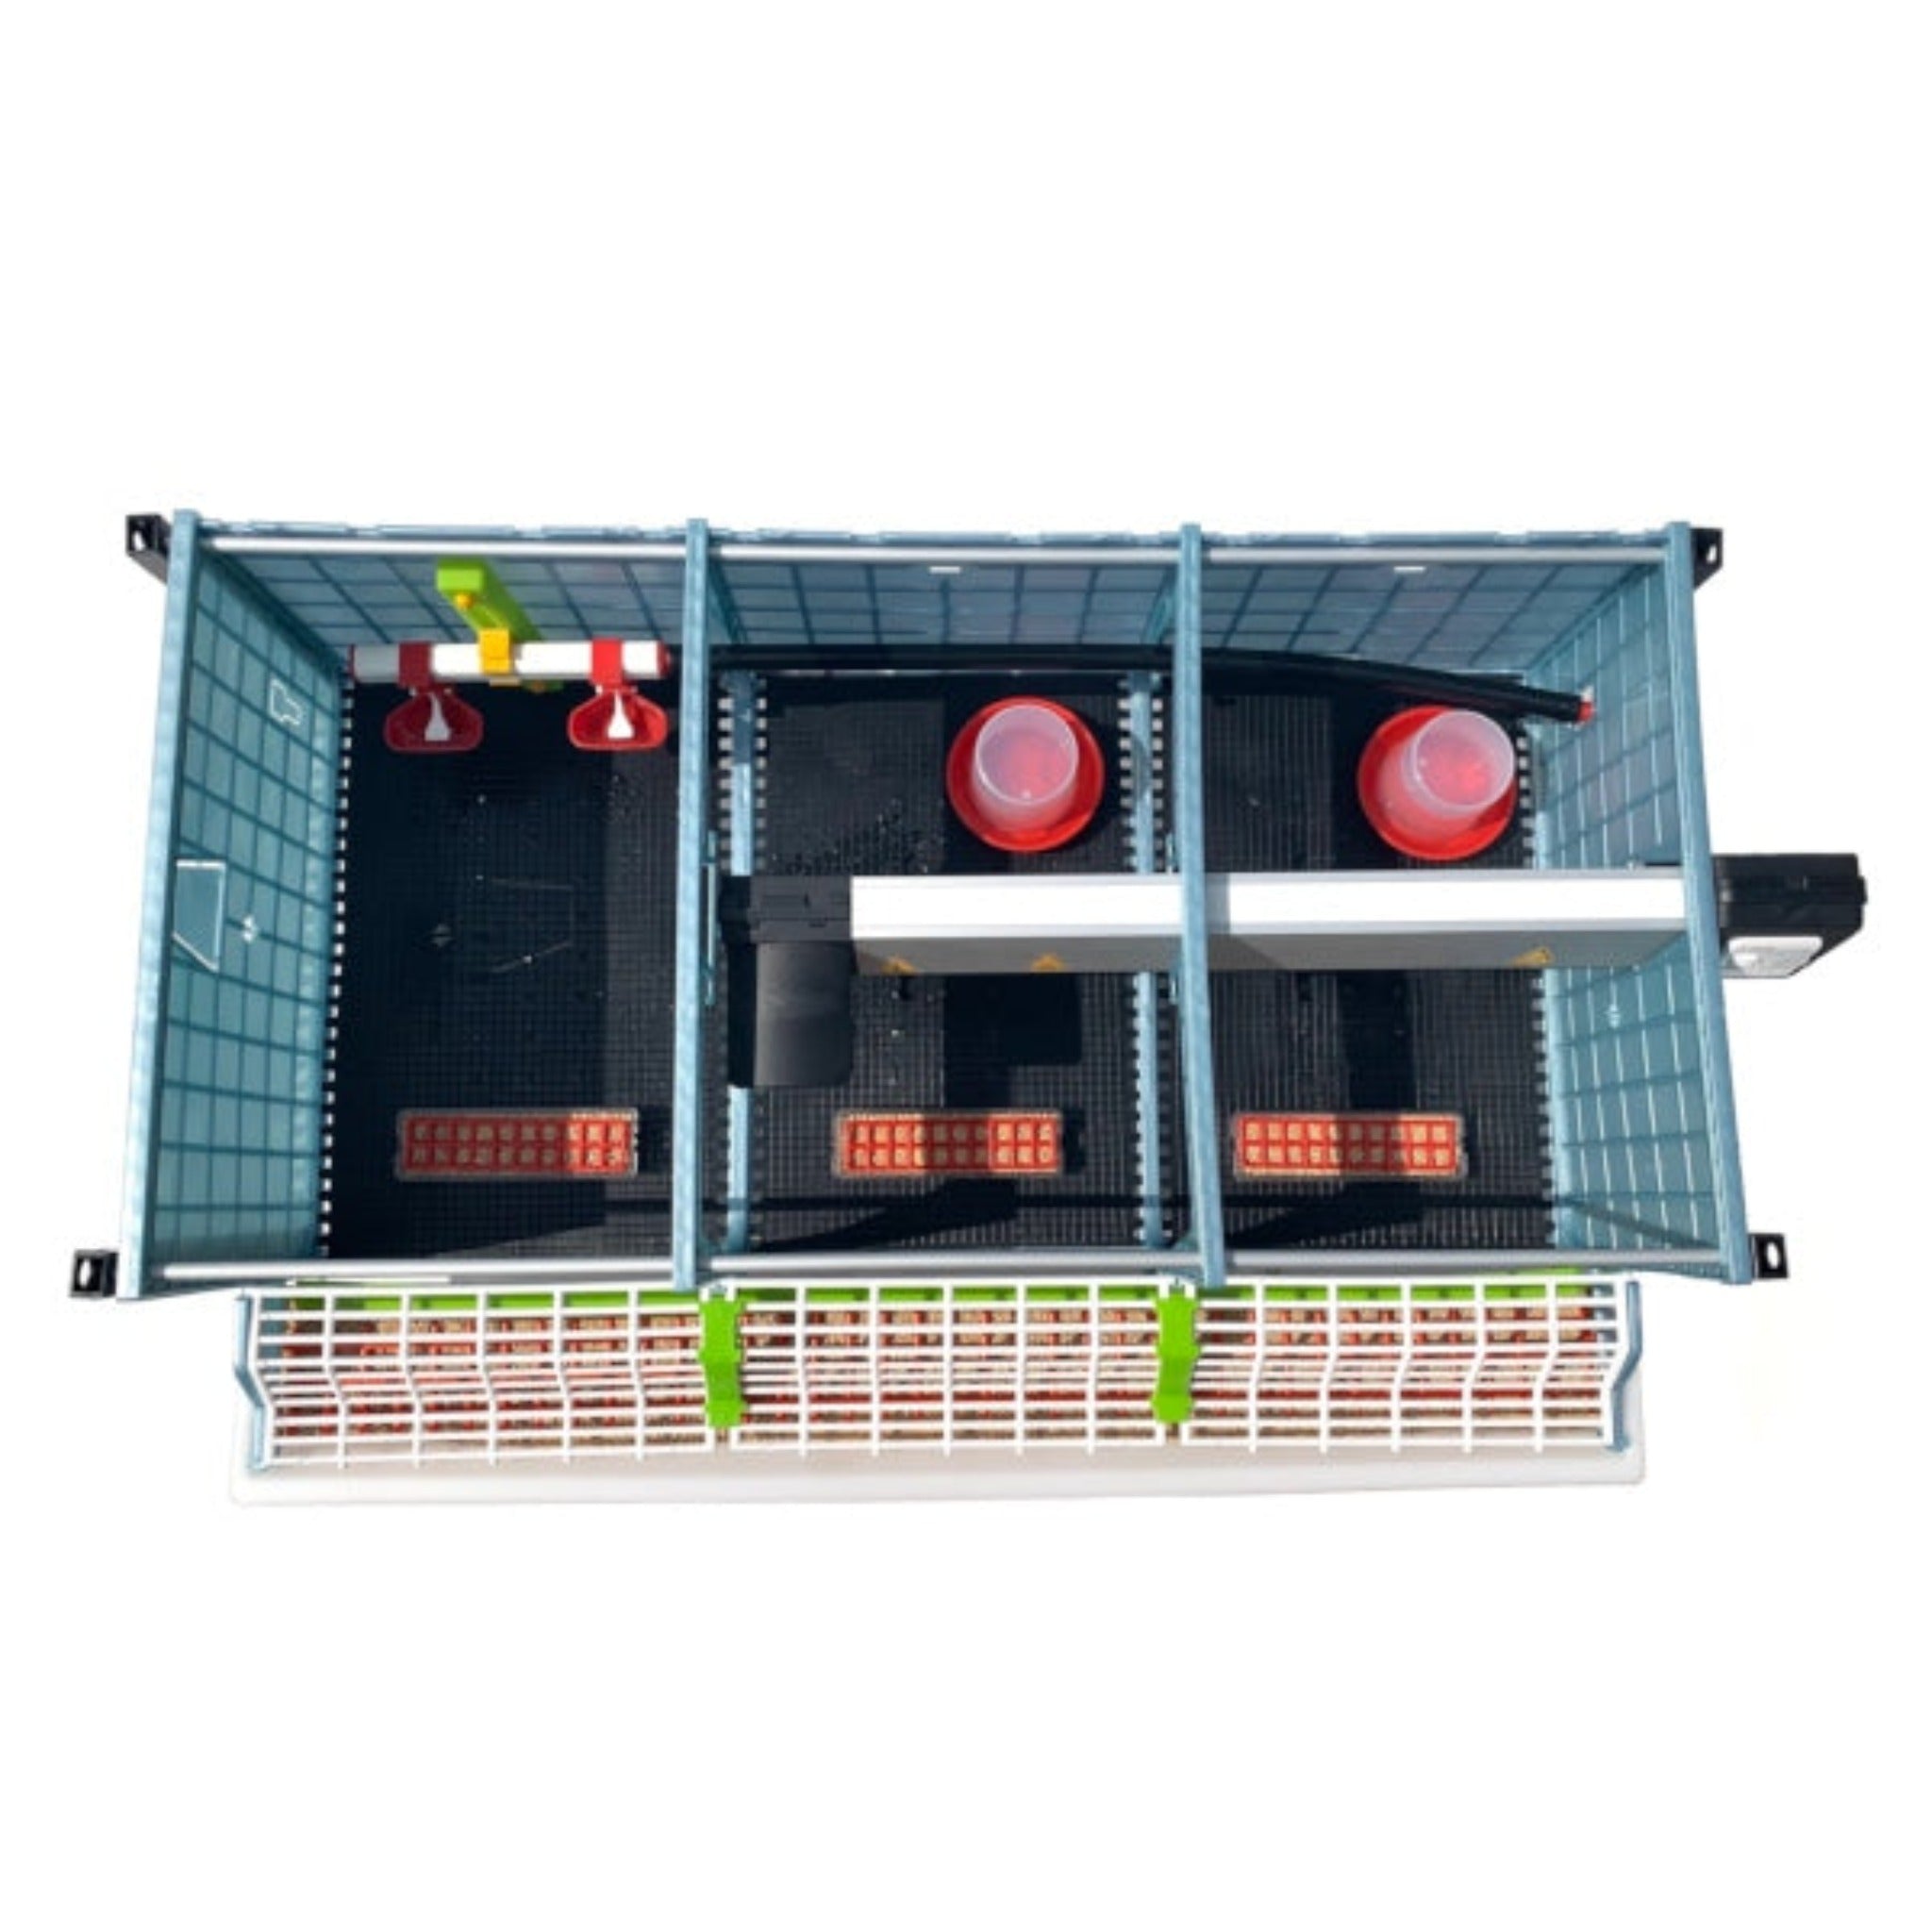 Hatching Time Cimuka Chick Brooder Overview - 9.5 inches -  top view of brooder can be seen with no roof. Interior shows chick floor mats on floor, 2 starter drinkers, 3 starter feeders, wall mounted drinker setup and heater through brooder. Exterior shows Feeding Trough.